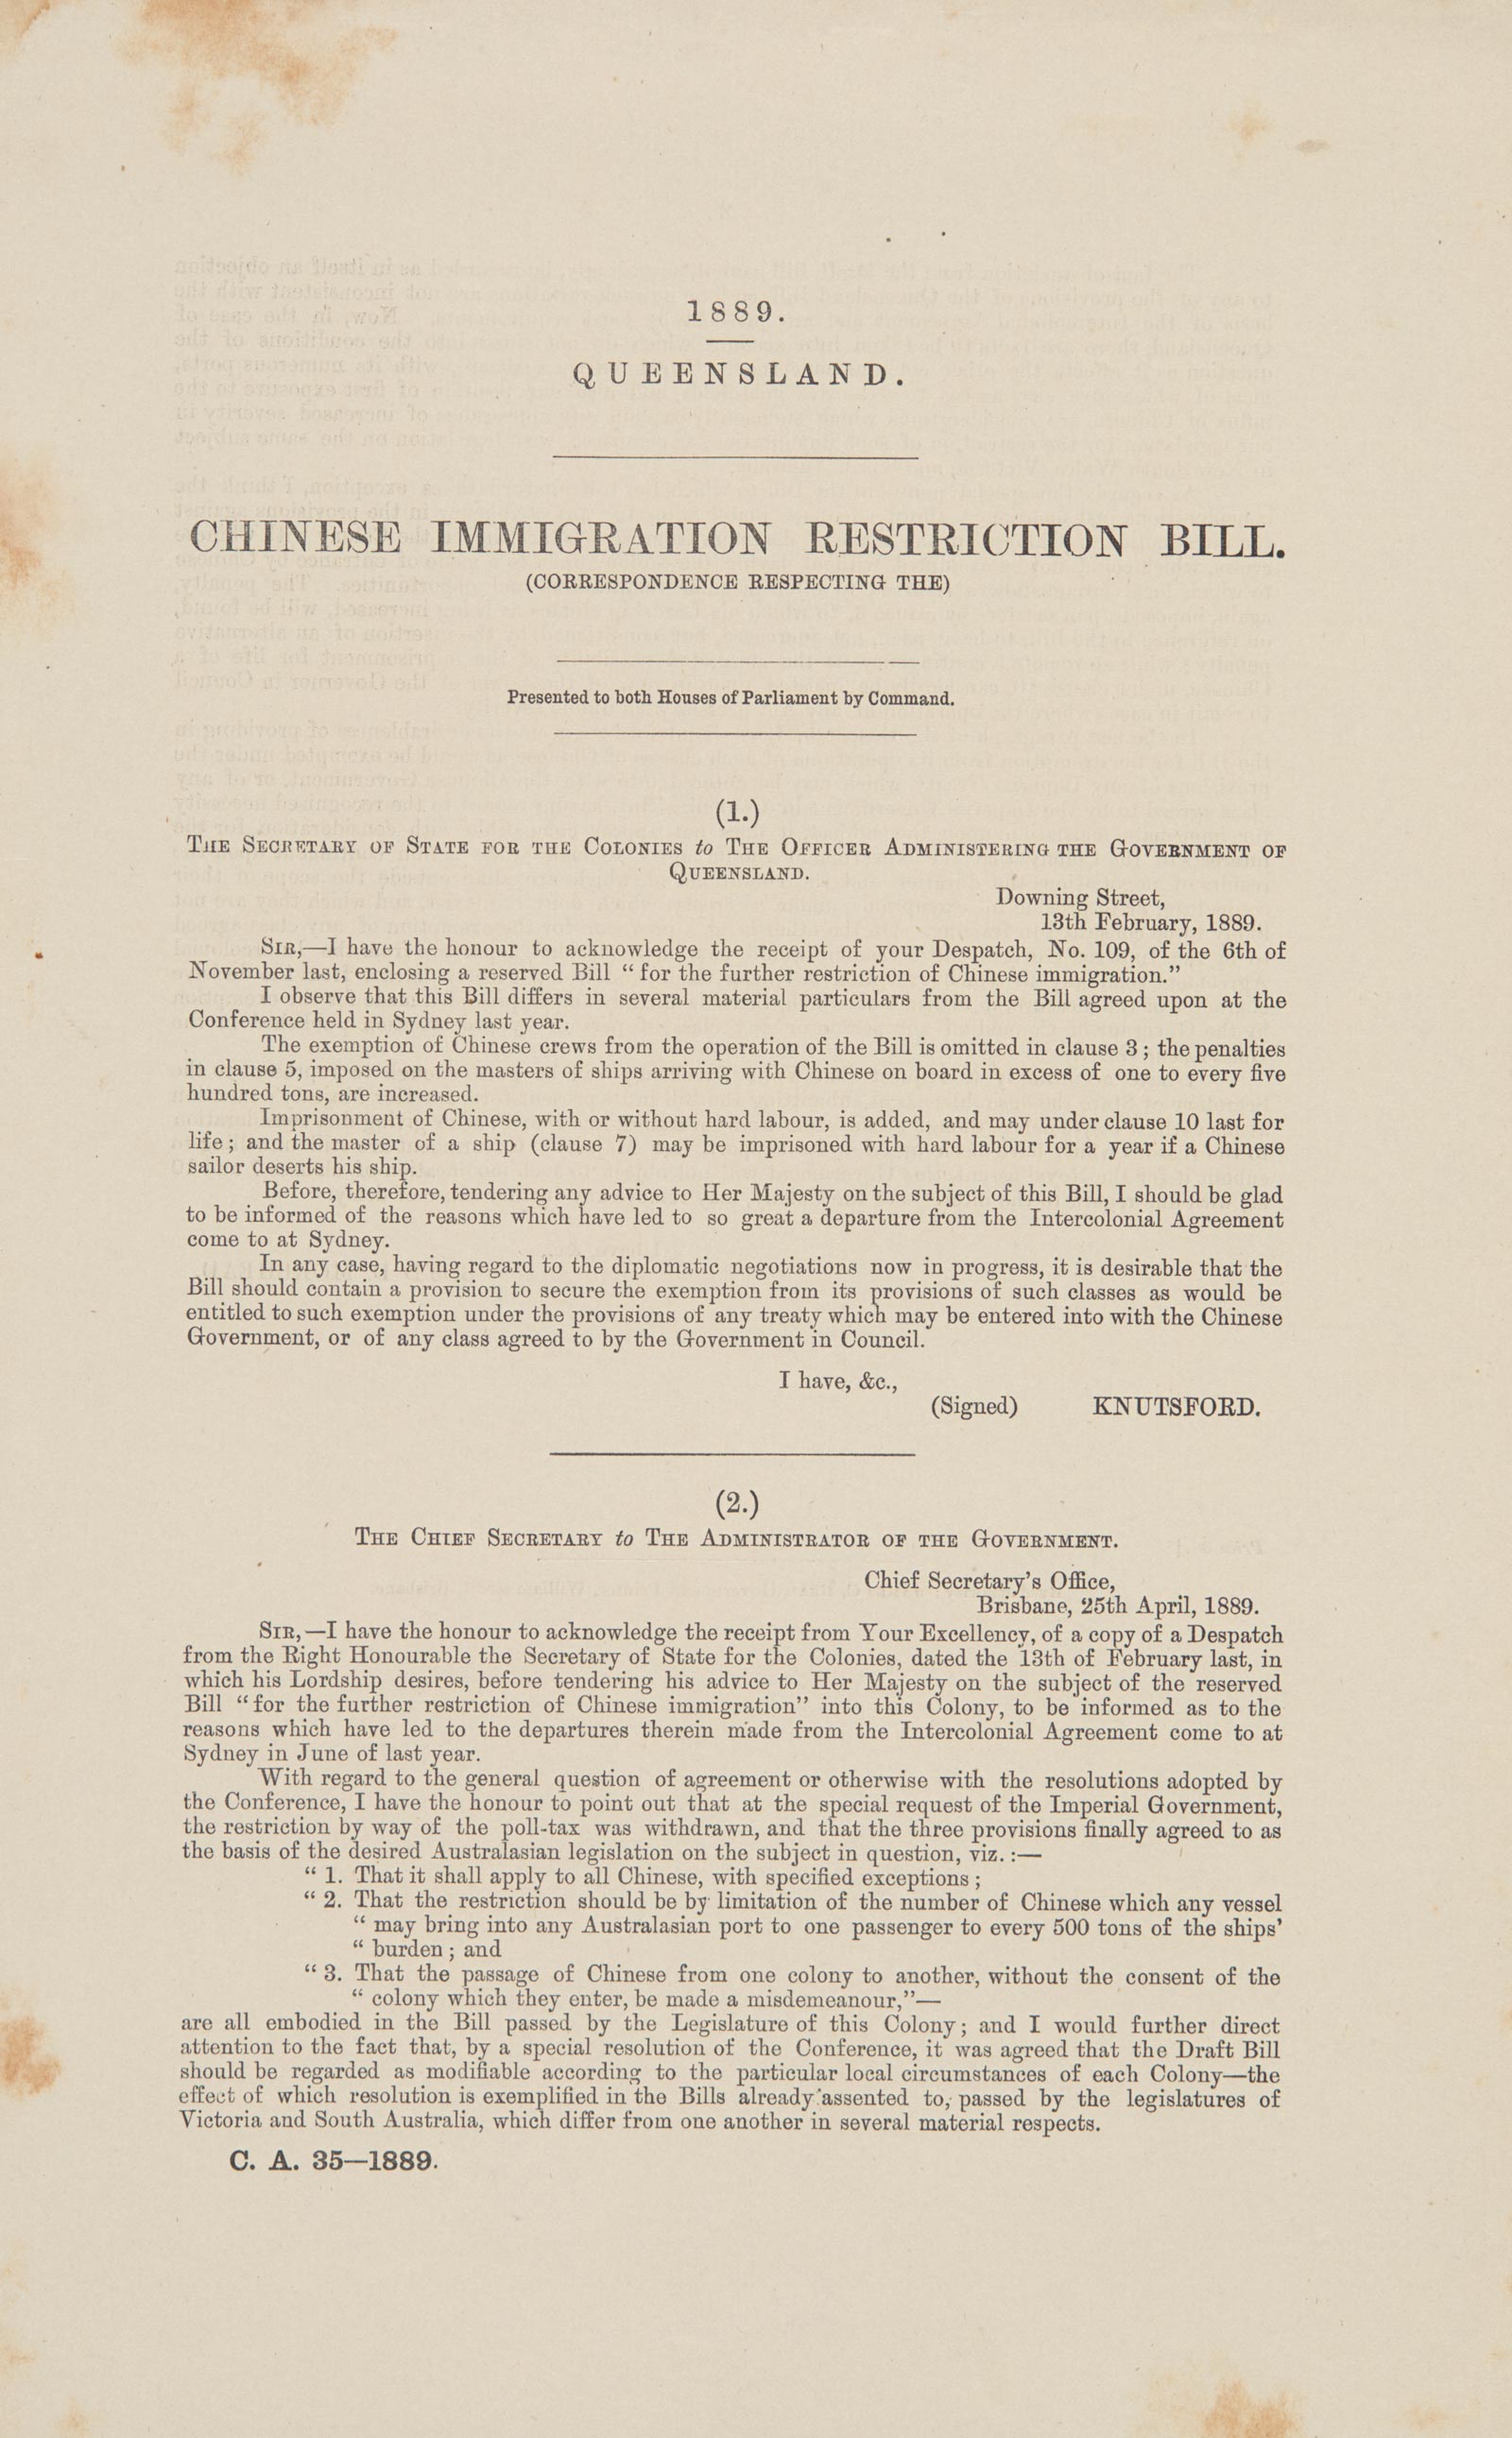 Chinese Immigration Restriction Bill, Queensland 1889.